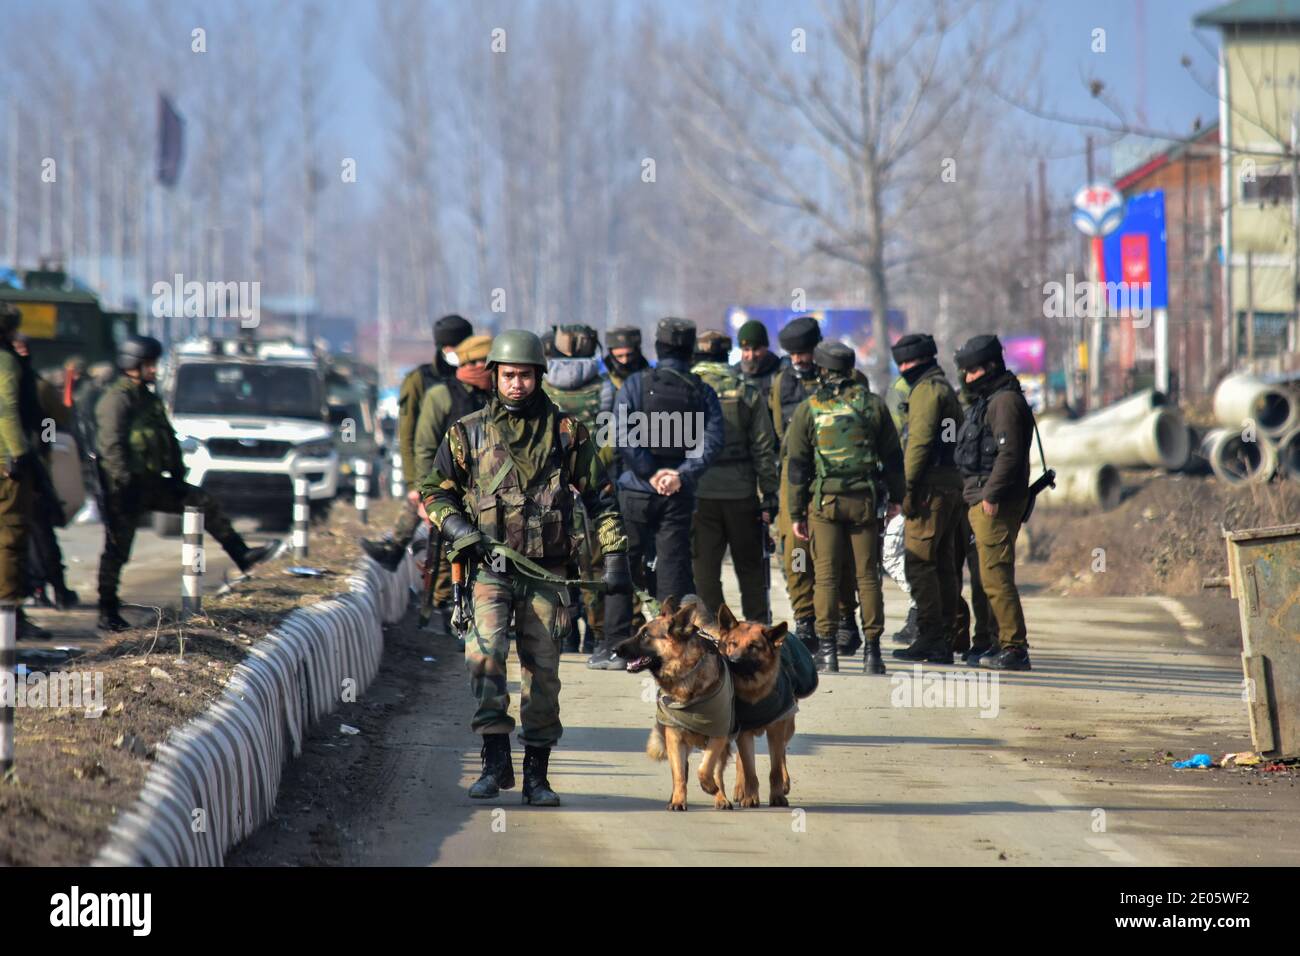 An Indian army soldier walks with sniffer dogs as he returns from the gun battle site on the outskirts of Srinagar. Three militants were killed in an overnight gun battle with government forces in Lawaypora area of Srinagar. The militants killed were planning a big strike on the Srinagar-Muzaffarabad highway, an official said. Stock Photo